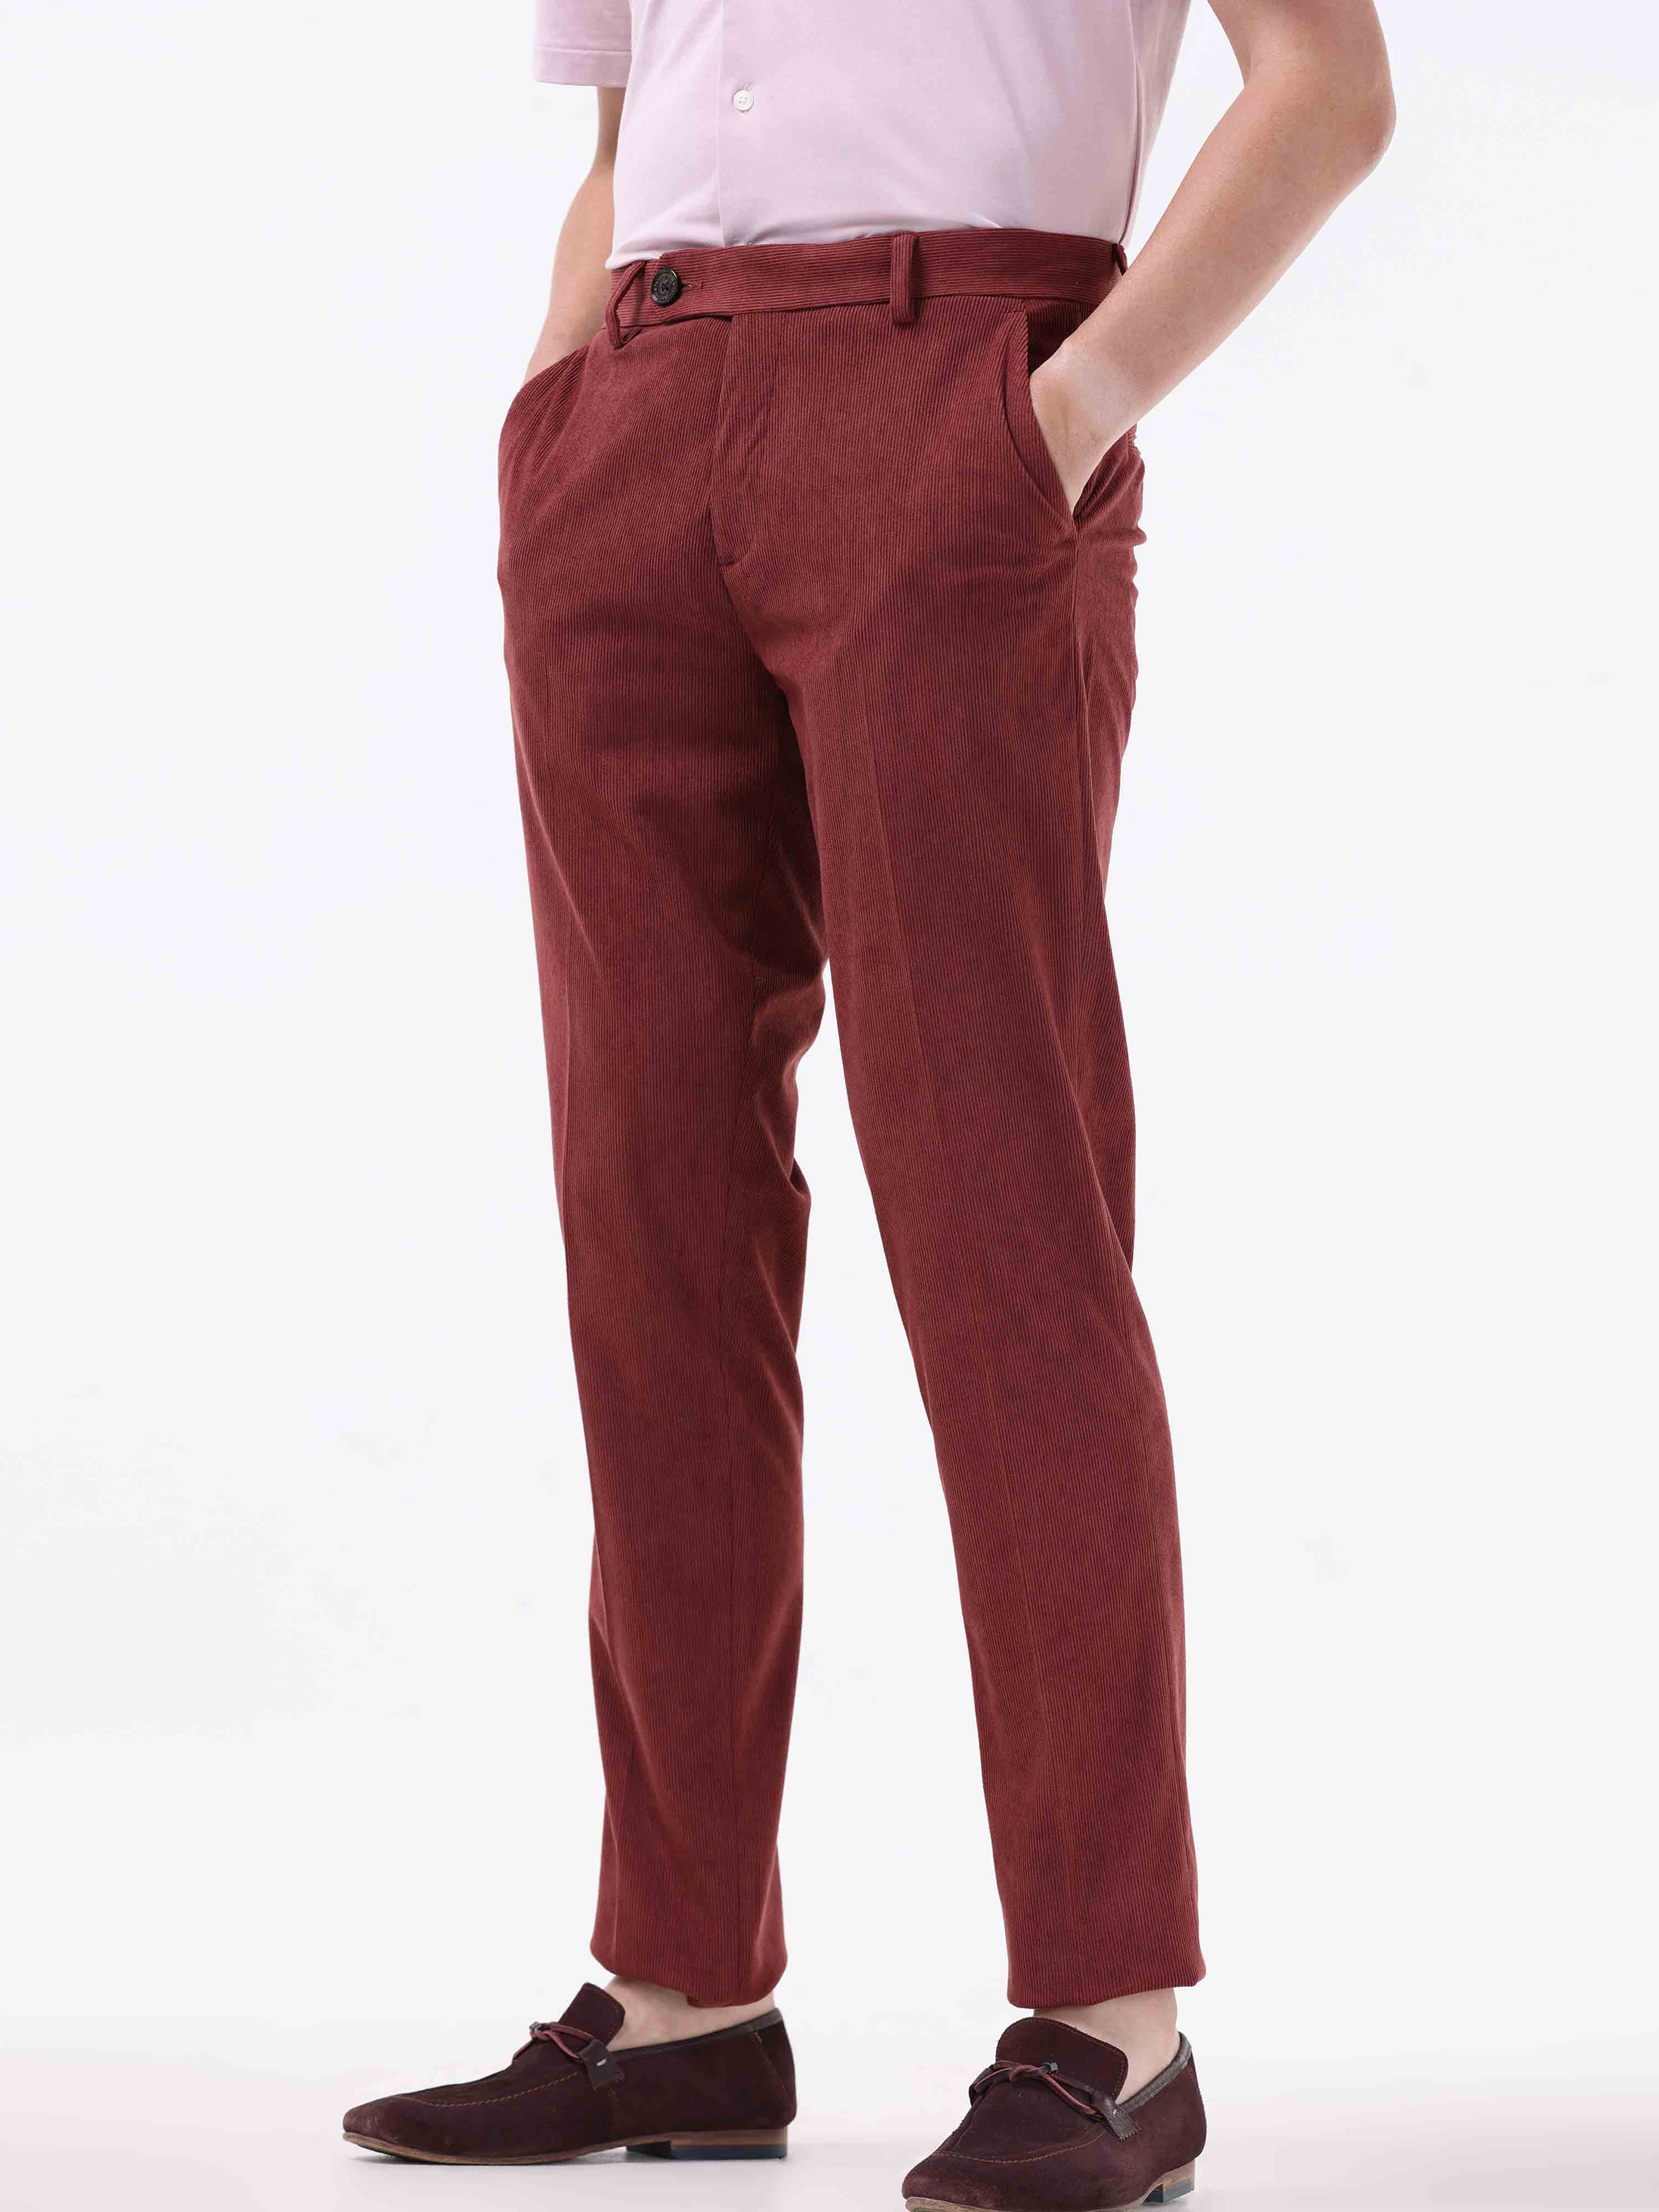 Stretch Corduroy 5 Pocket Pants for Tall Men | American Tall